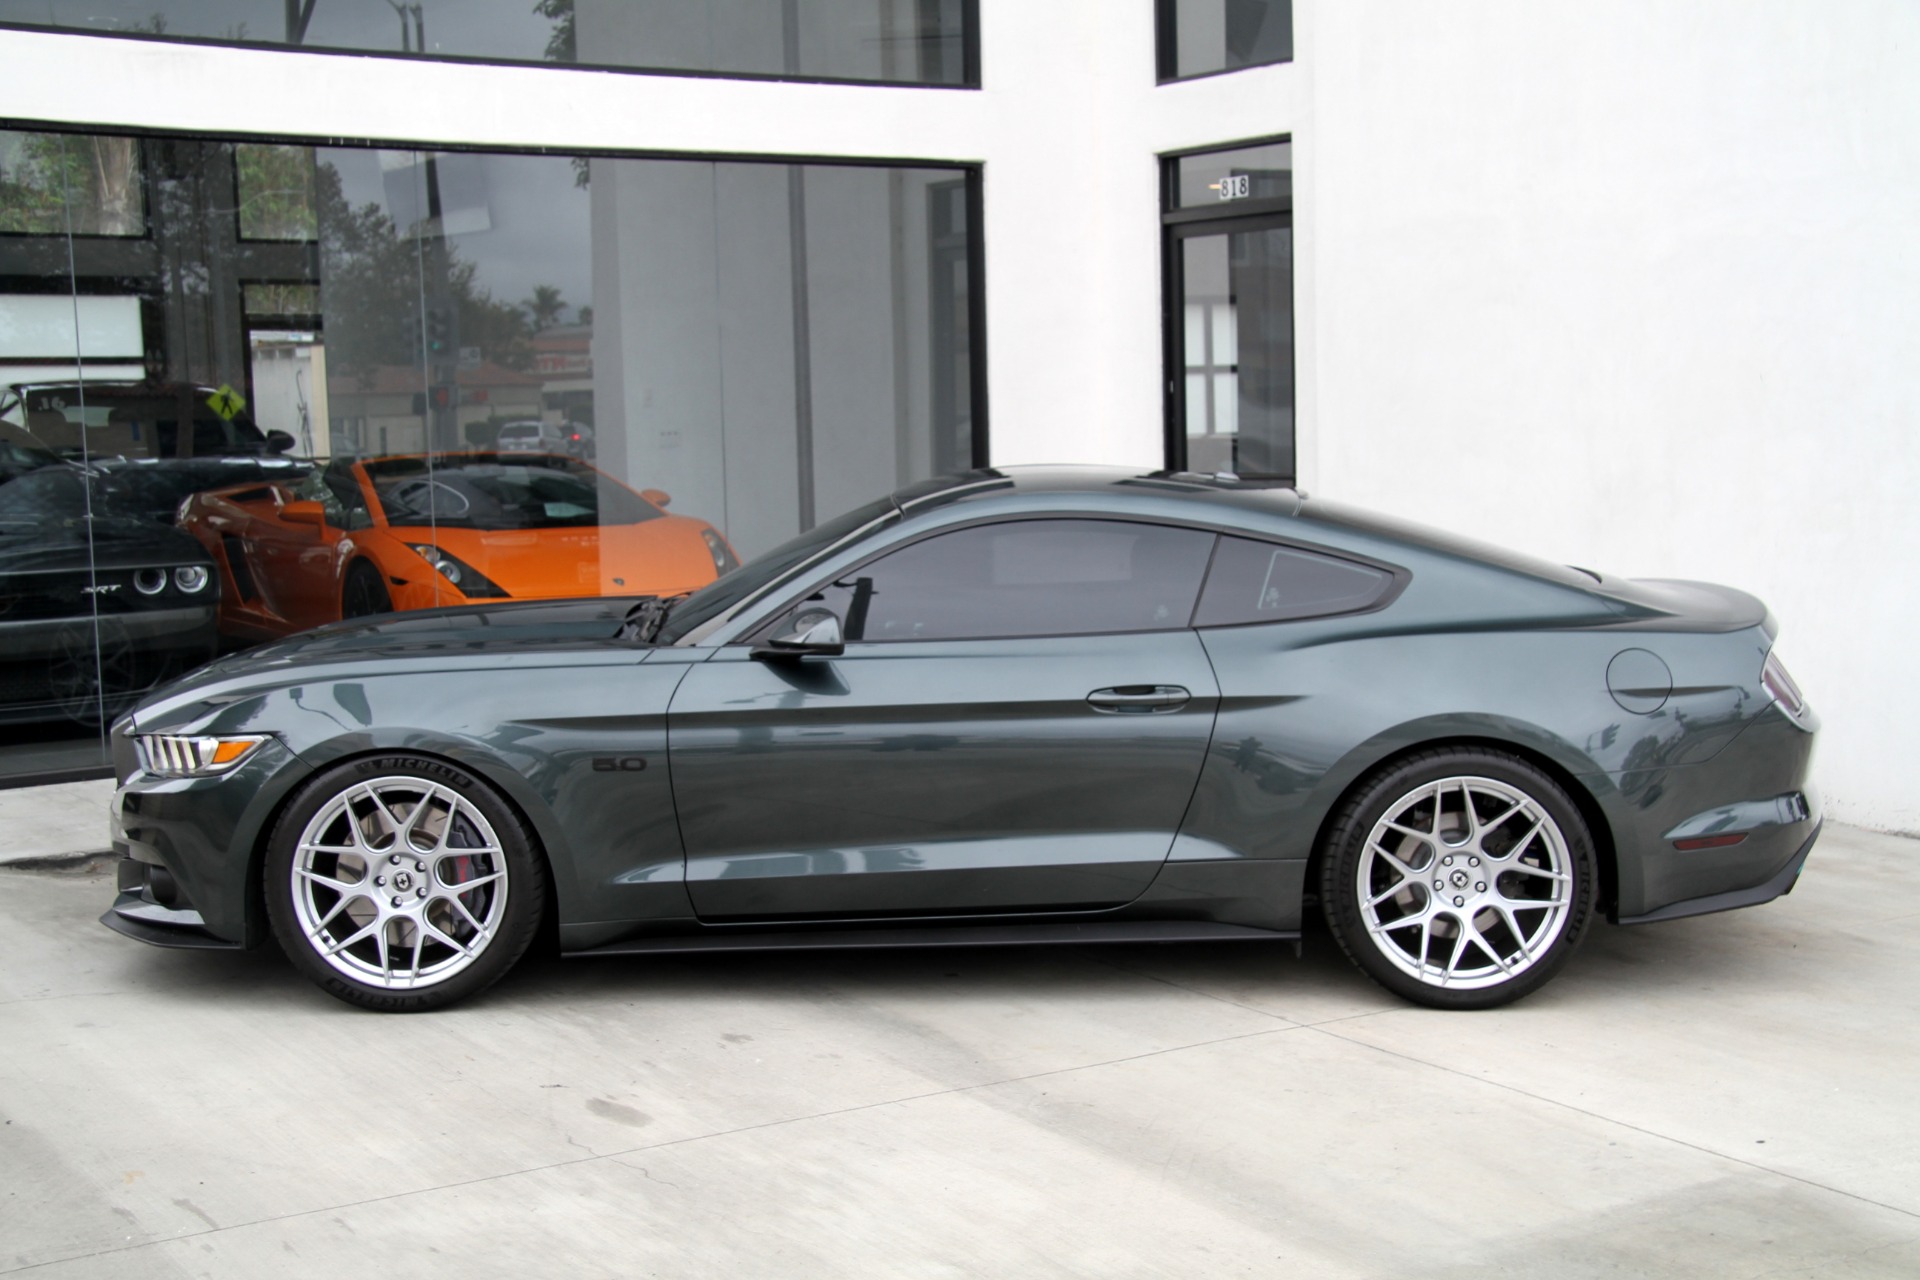 2015 Ford Mustang Gt Premium Stock 5854c For Sale Near